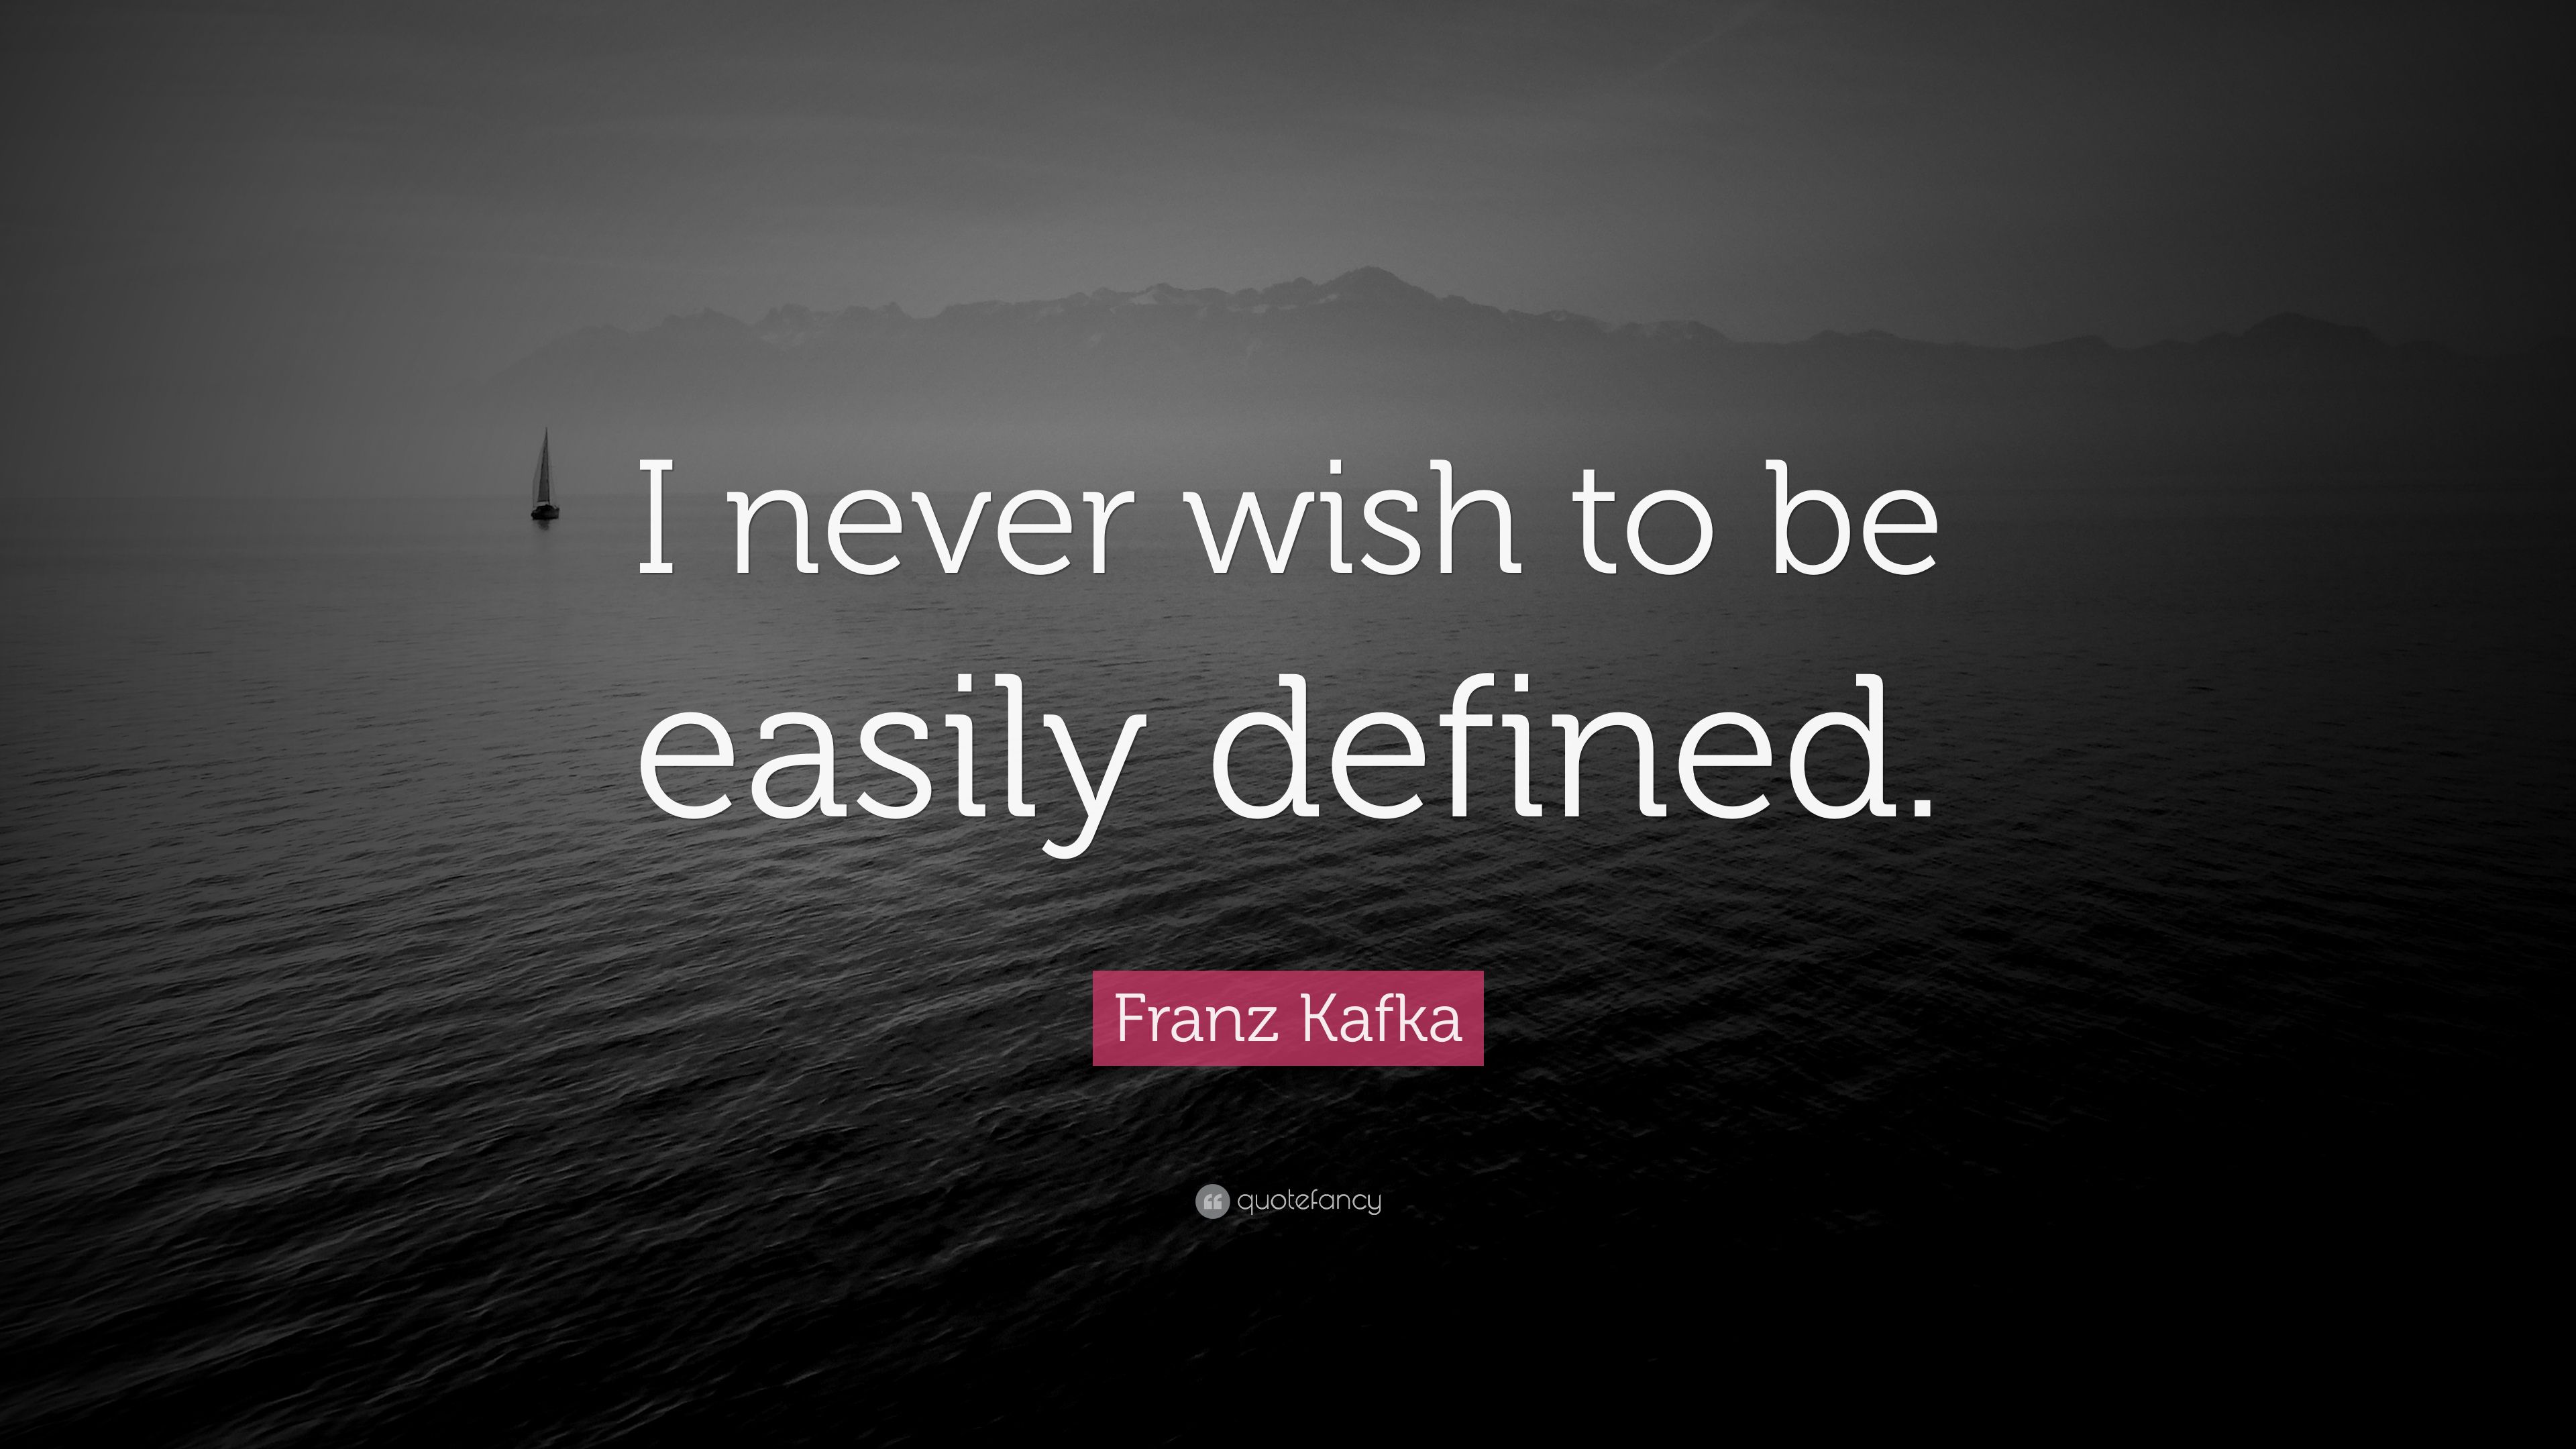 Franz Kafka Quote: “I never wish to be easily defined.” 12